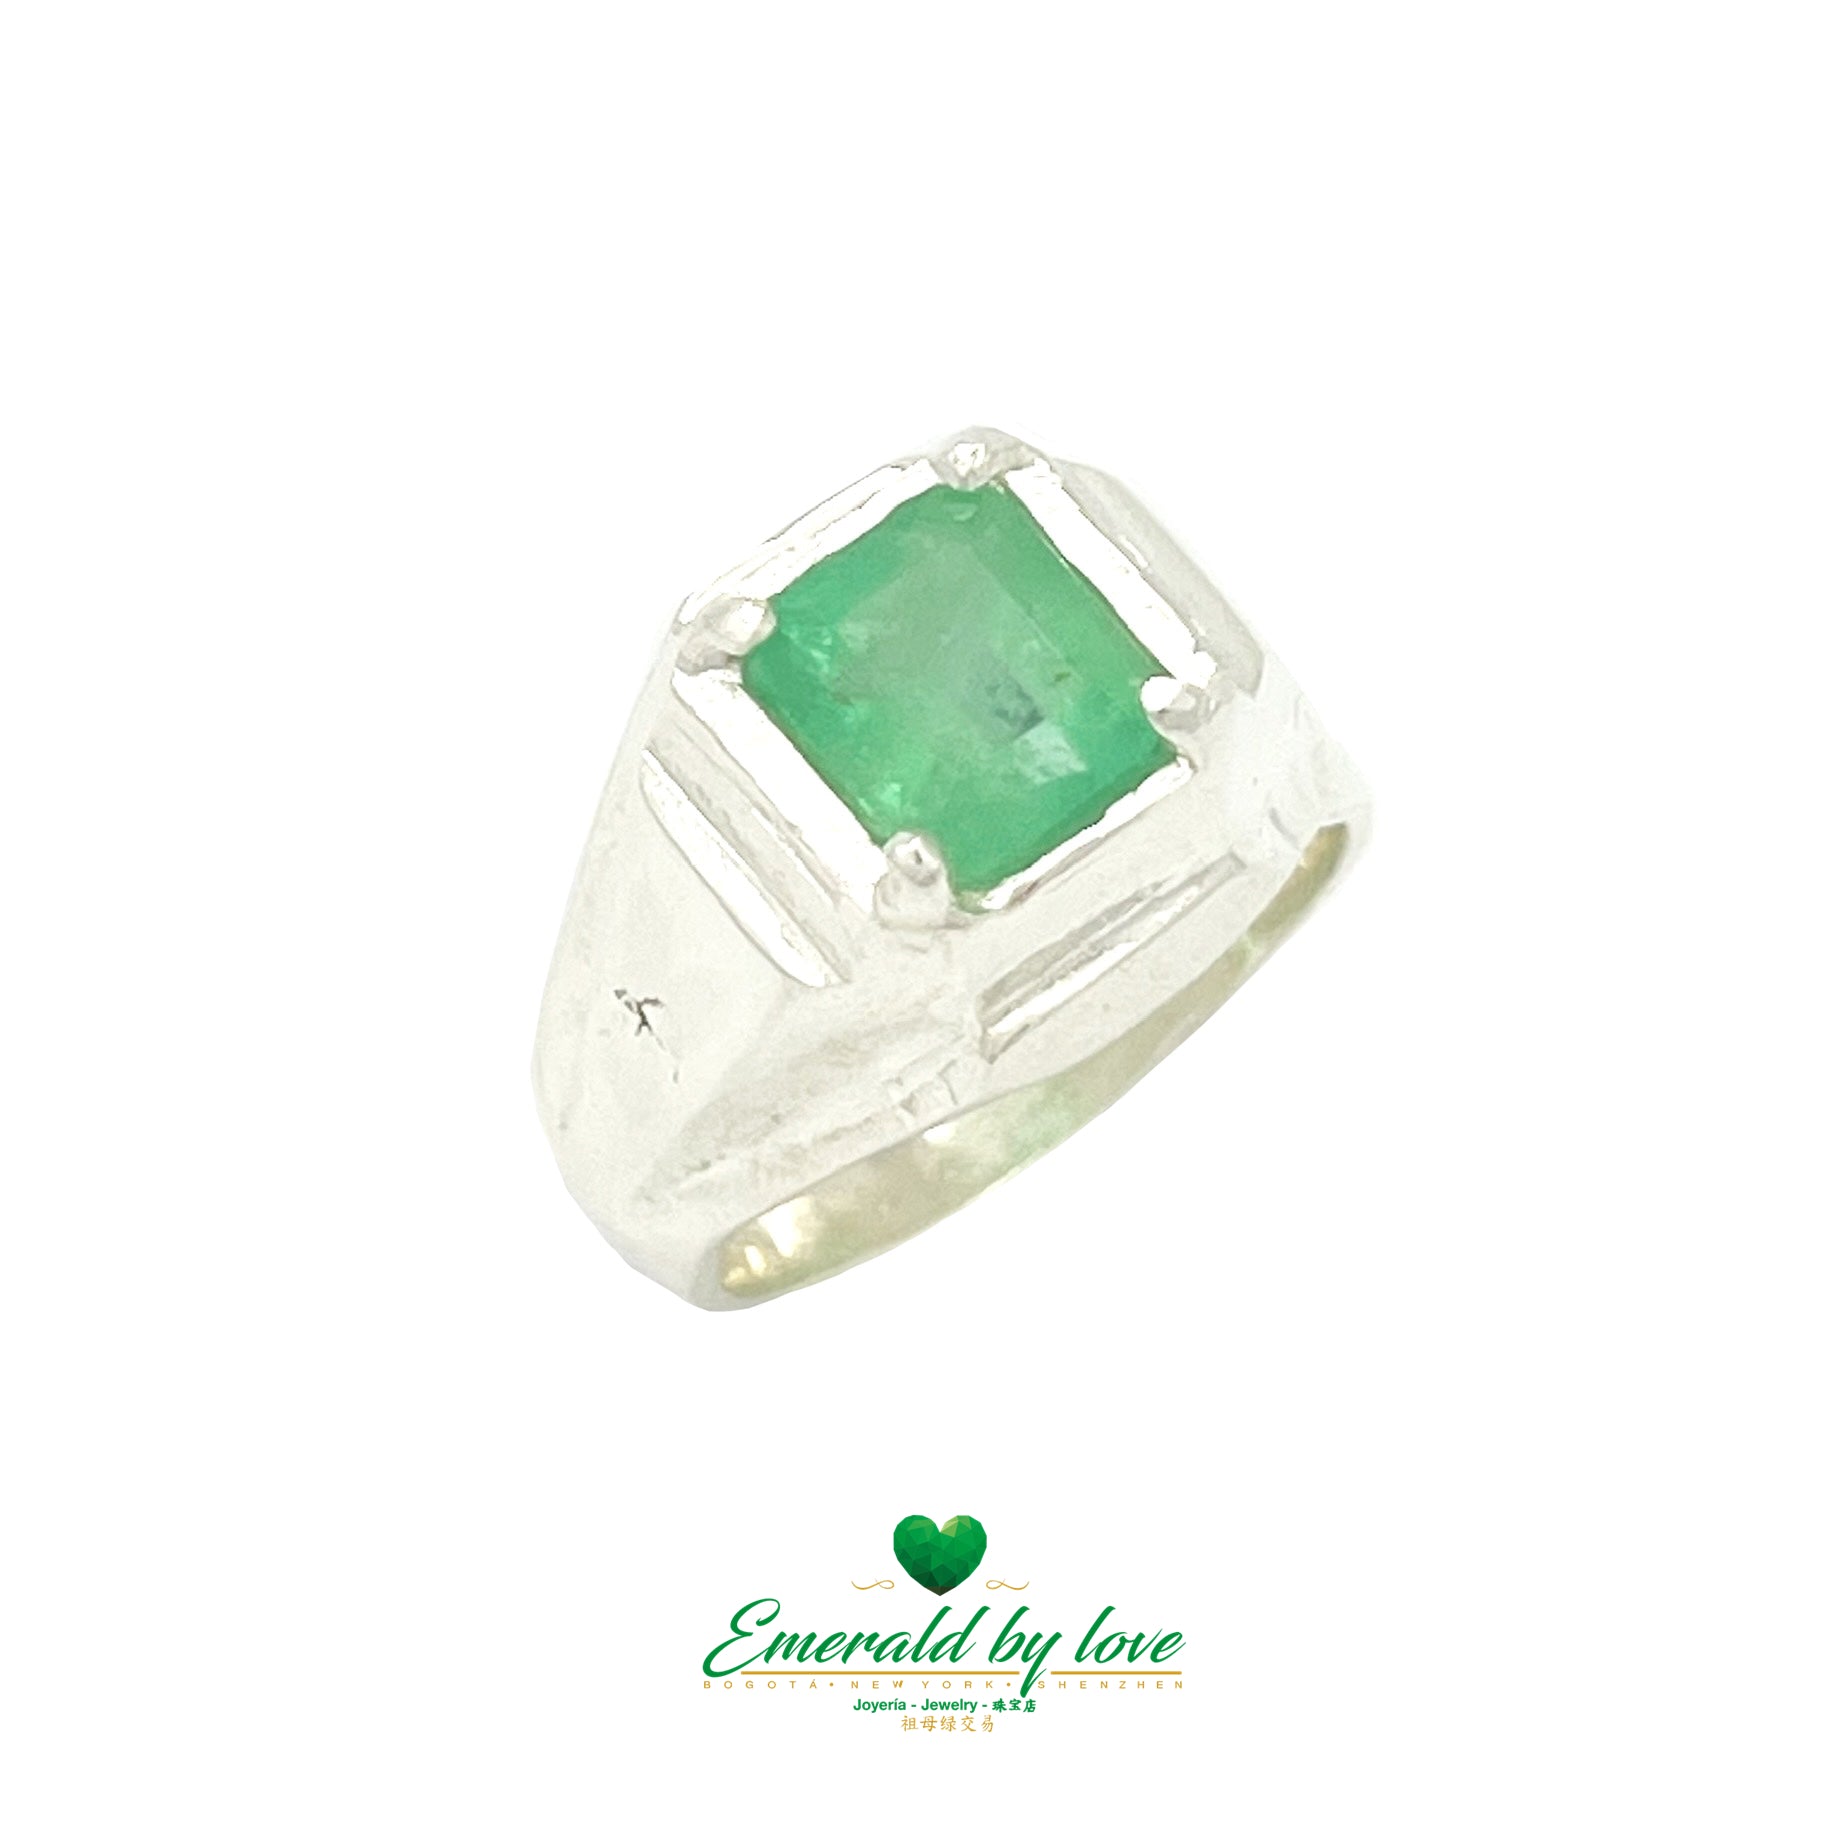 Square Emerald Men's Ring with Four-Prong Setting in Silver